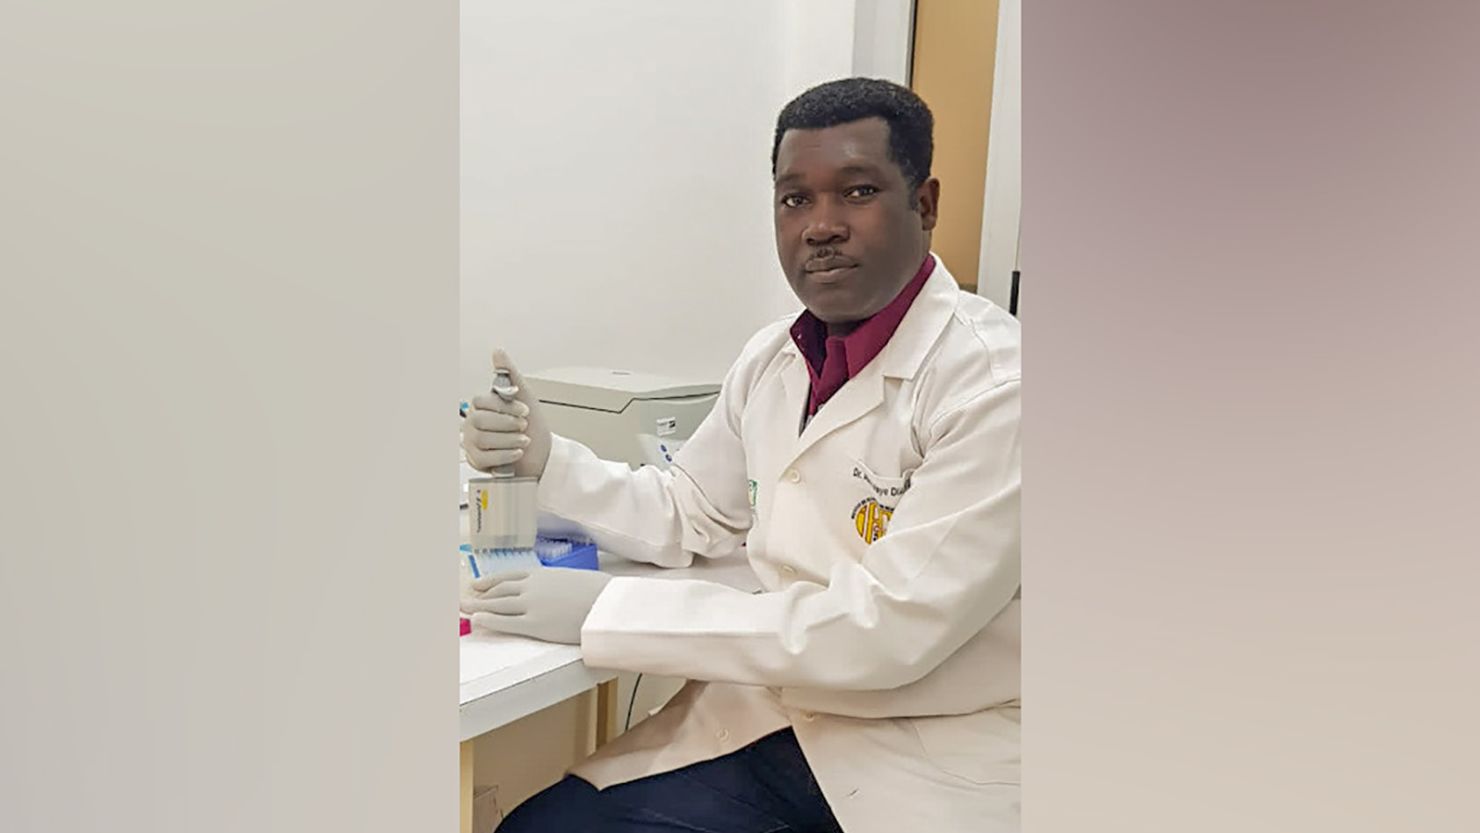 Burkina Faso scientist Abdoulaye Diabate, who is developing a groundbreaking innovation that could potentially wipe out malaria-transmitting mosquito species by altering their genes